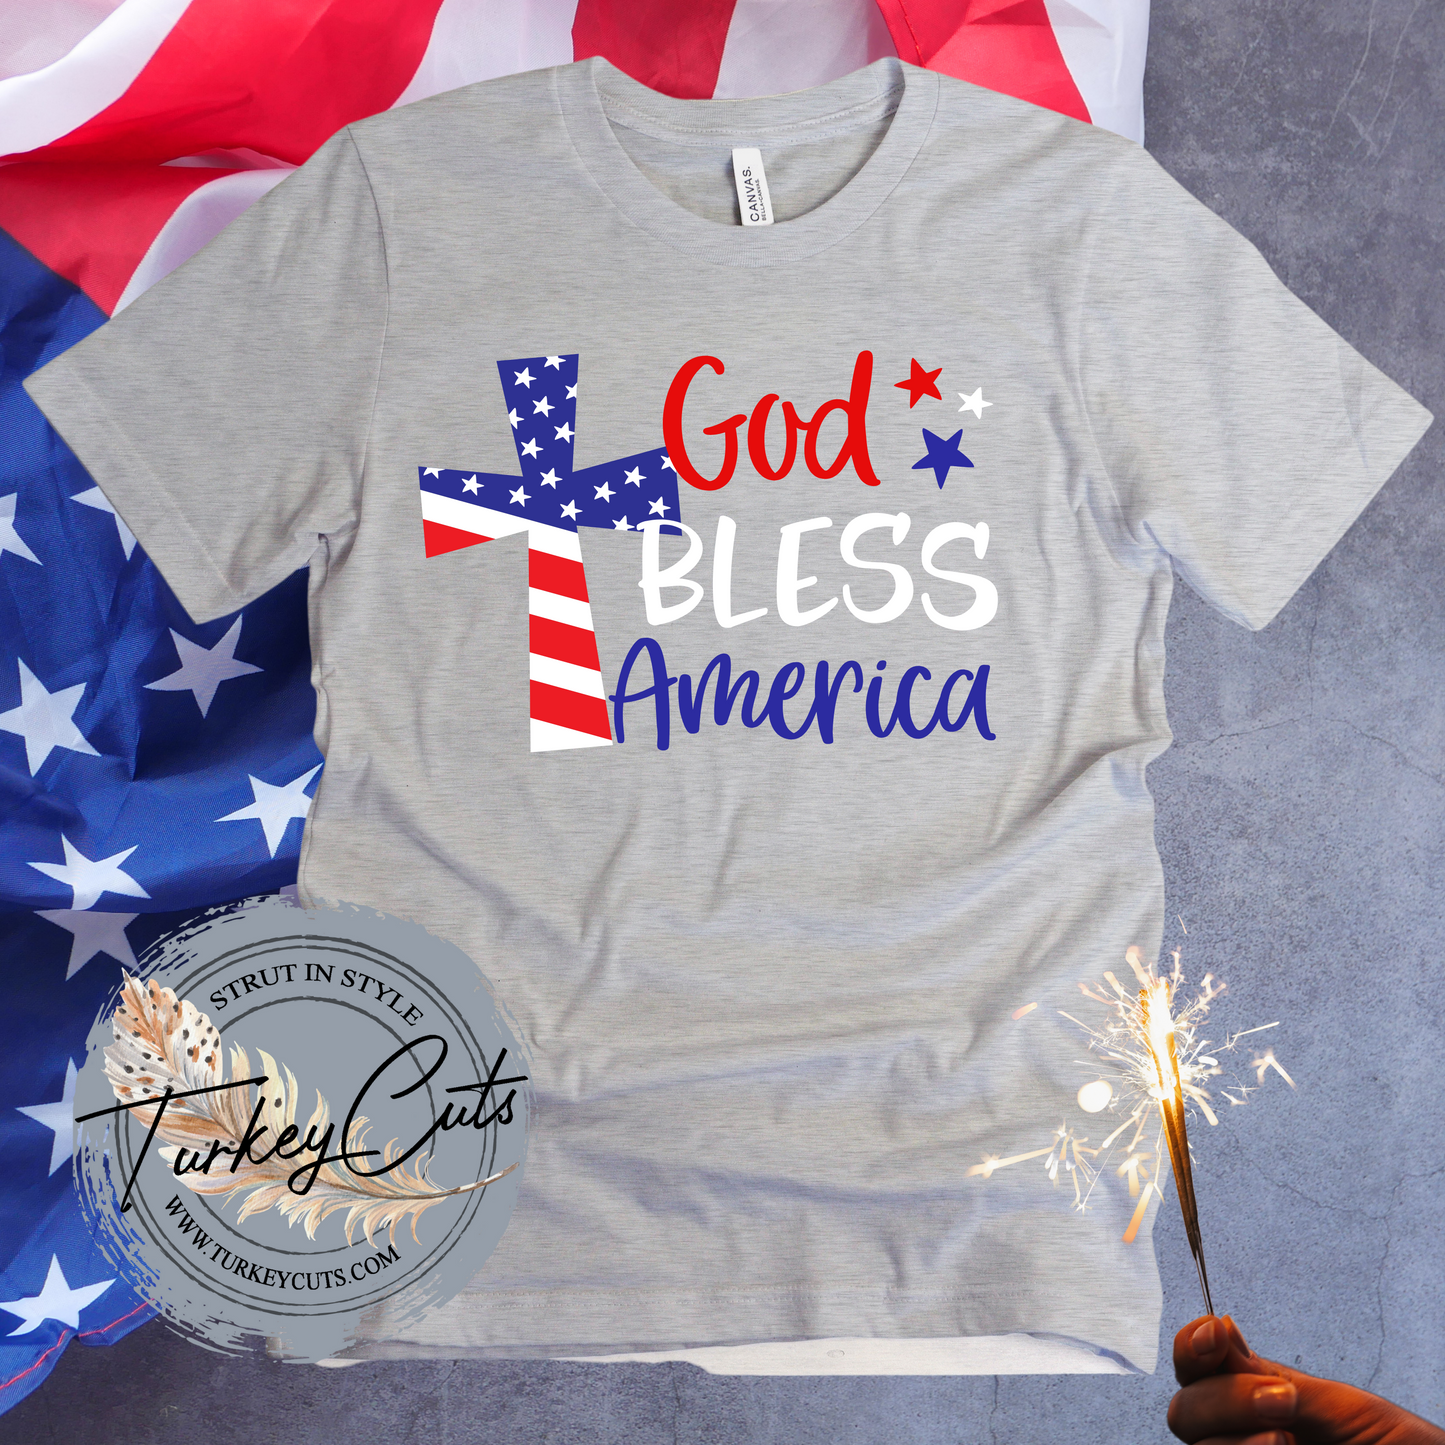 God Bless America Tee Special!! YOUTH